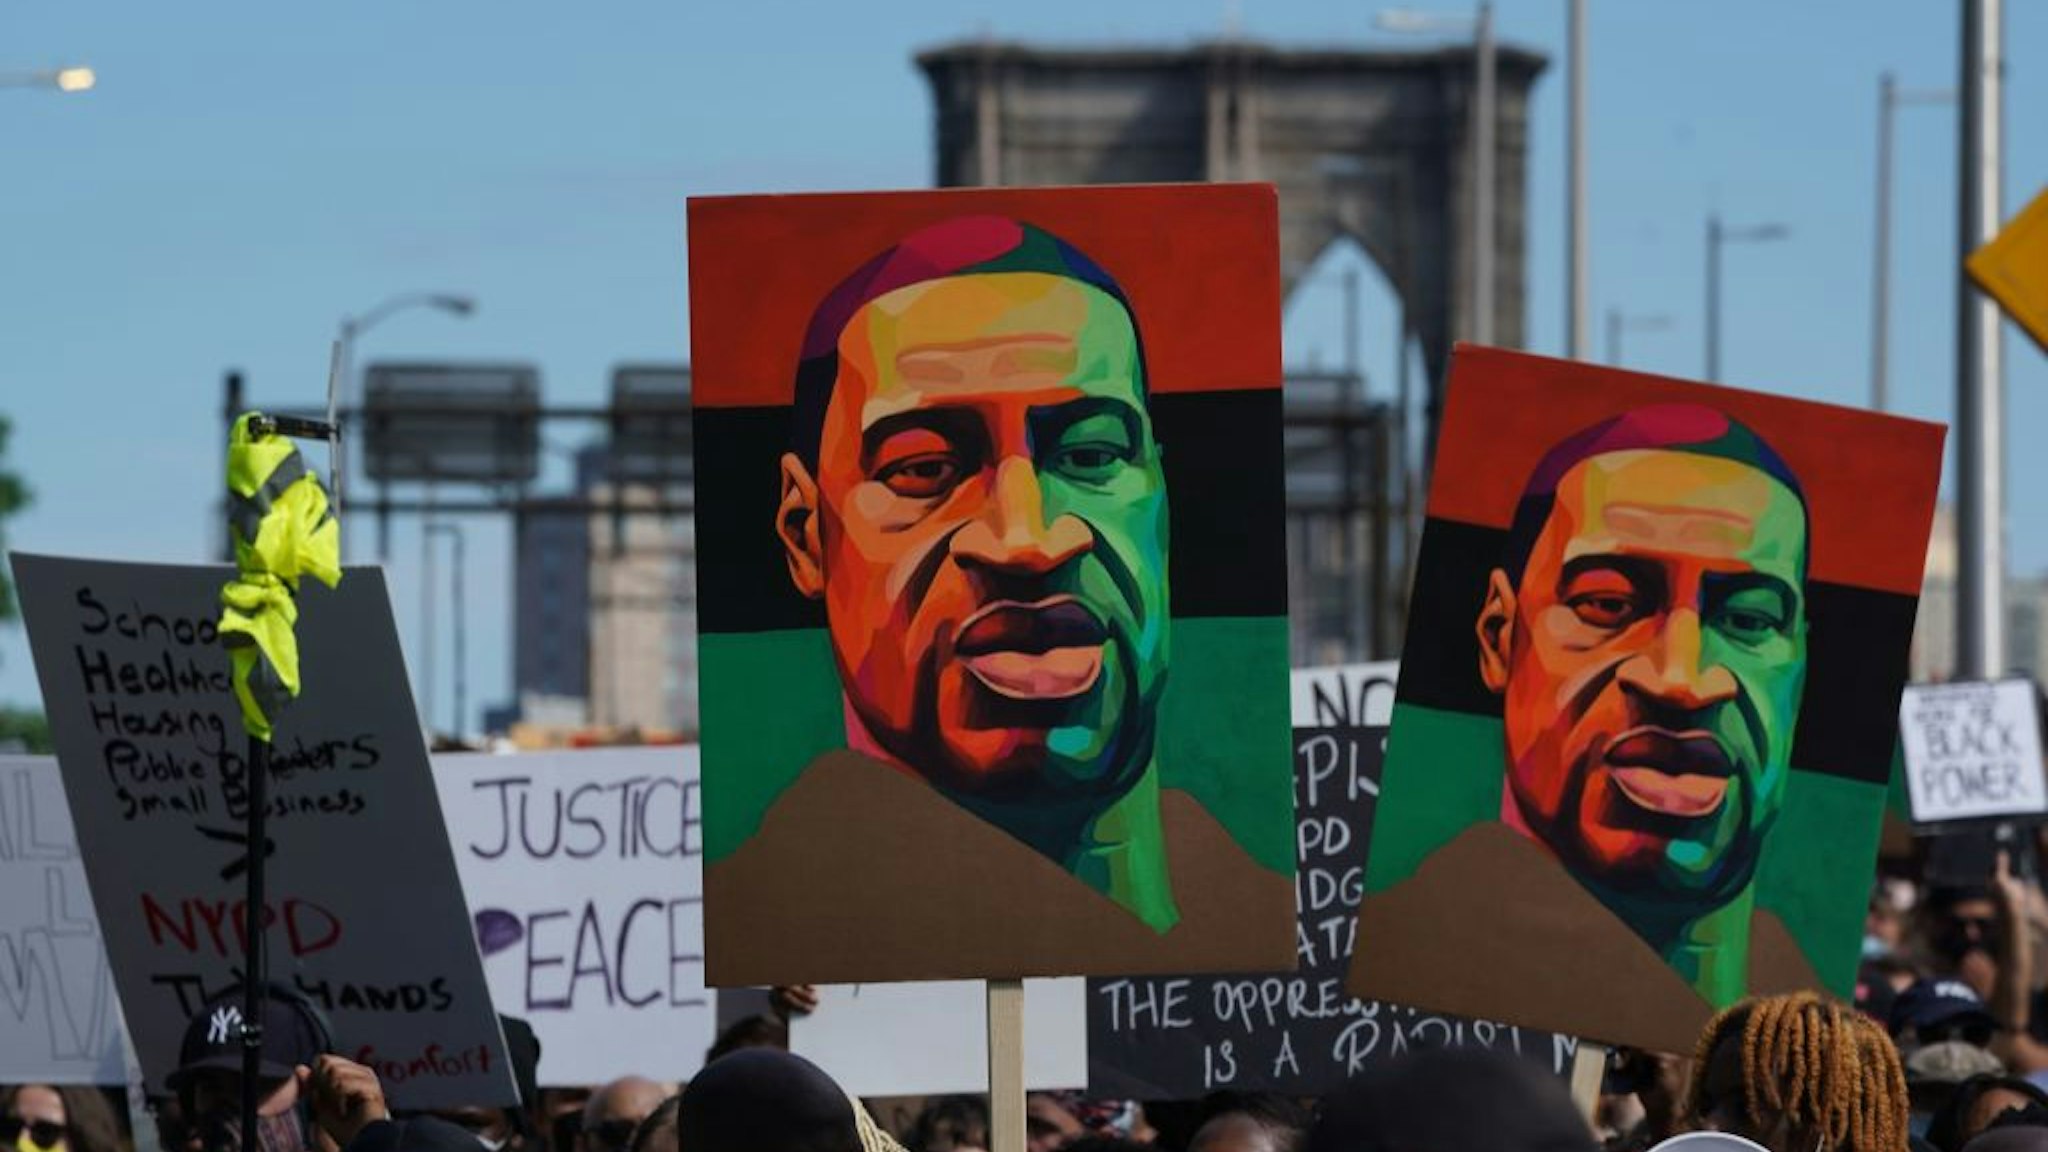 TOPSHOT - Protesters march across the Brooklyn Bridge over the death of George Floyd by Minneapolis Police during a Juneteenth rally in New York on June 19, 2020. - The US marks the end of slavery by celebrating Juneteenth, with the annual unofficial holiday taking on renewed significance as millions of Americans confront the nation's living legacy of racial injustice. (Photo by Bryan R. Smith / AFP) (Photo by BRYAN R. SMITH/AFP via Getty Images)